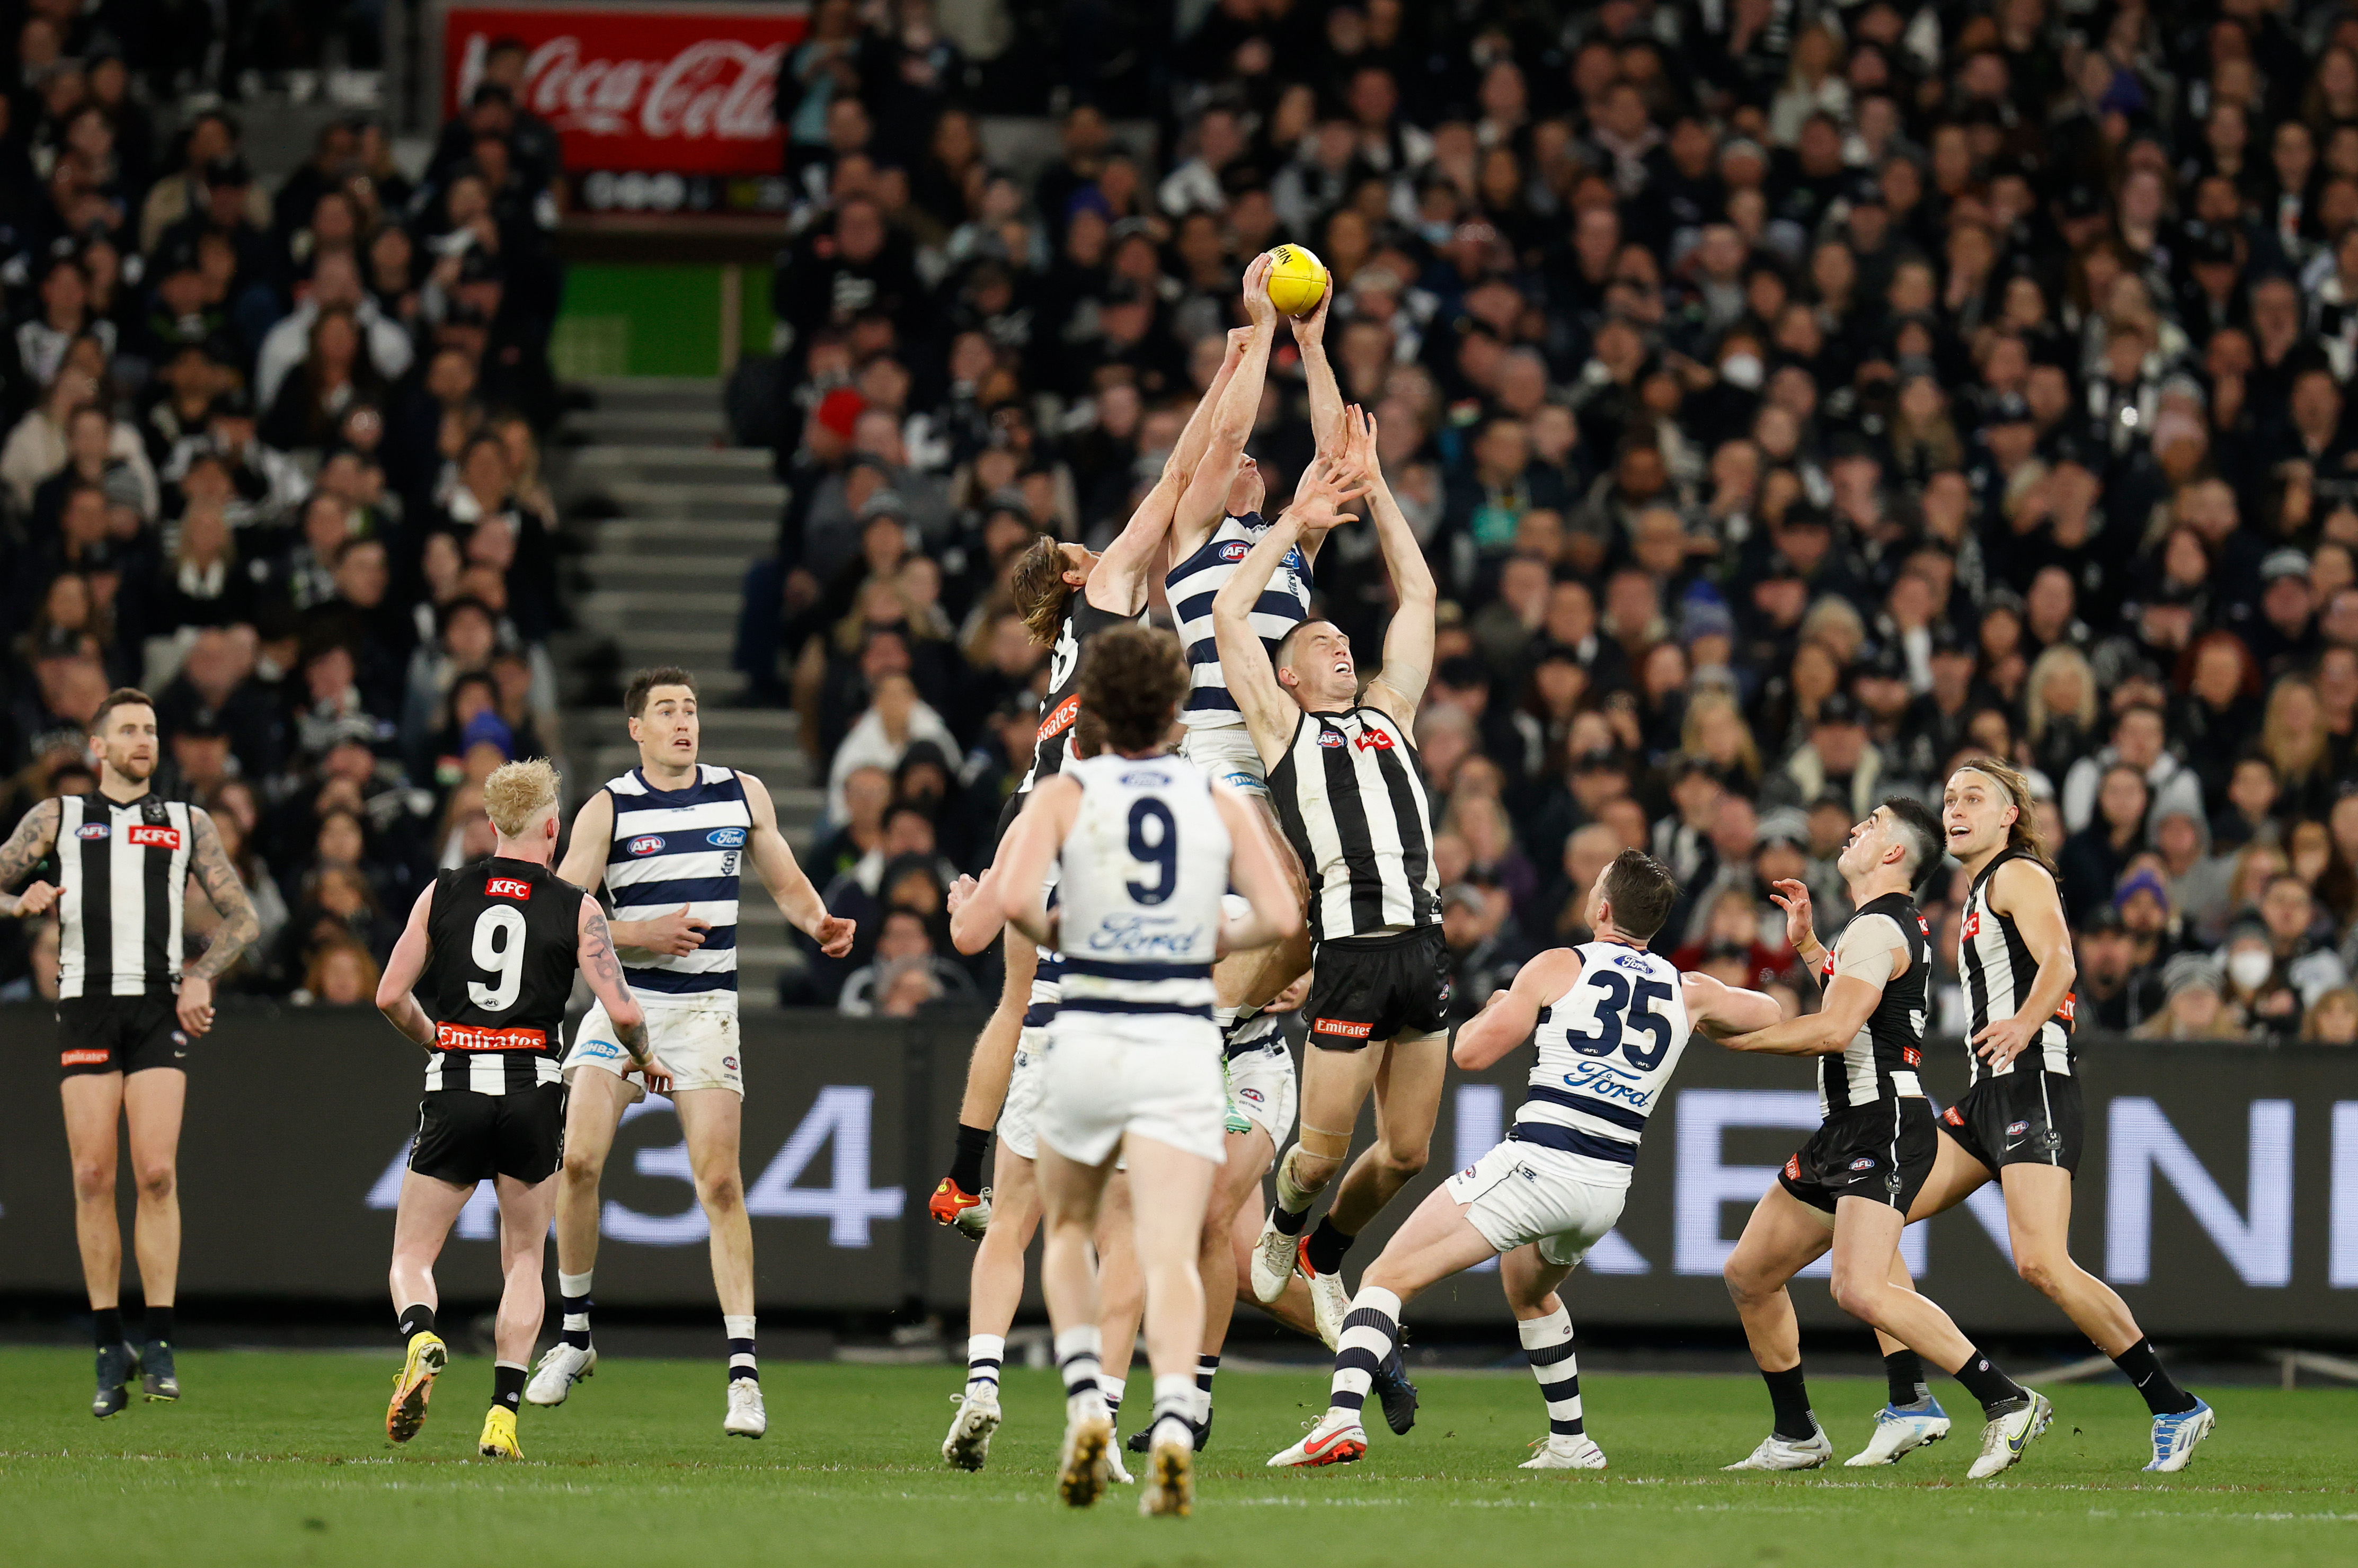 Geelong's Gary Rohan marks the ball over Darcy Cameron of the Magpies.